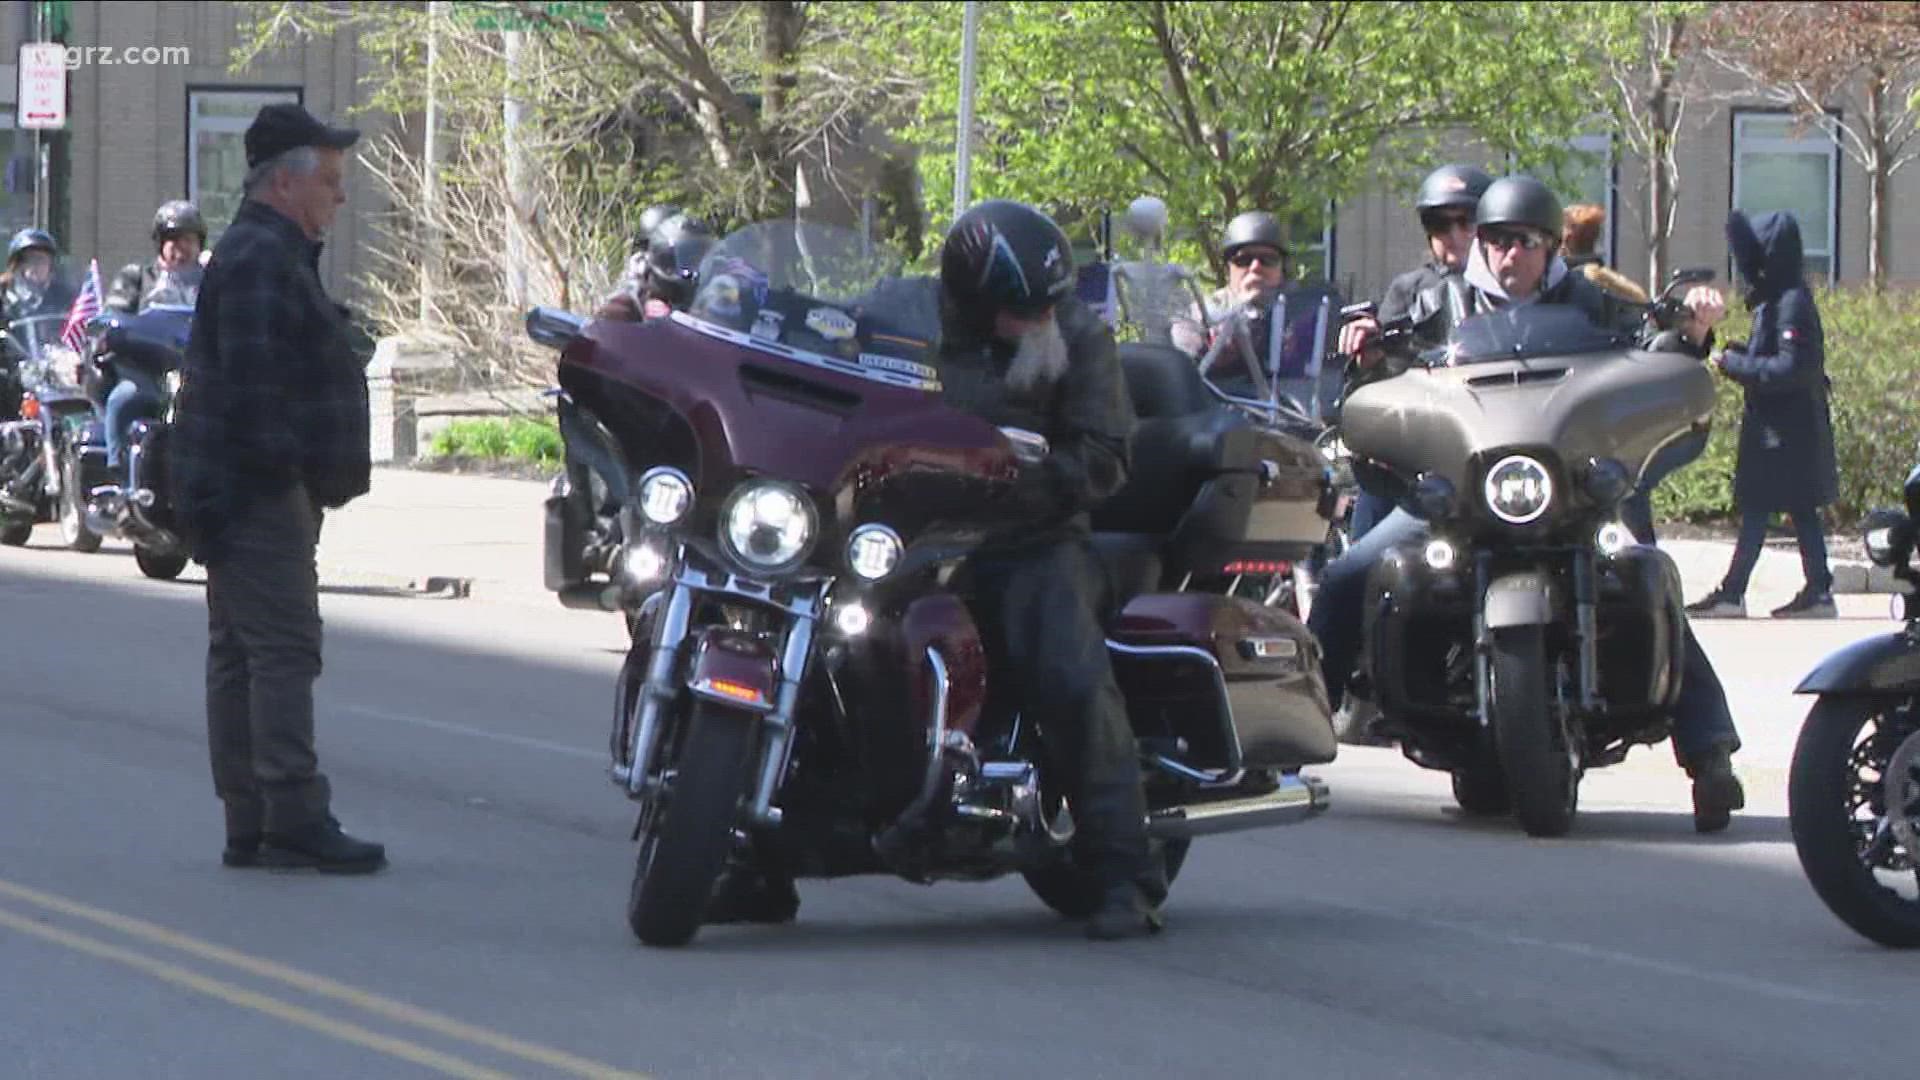 Western New York has already seen at least three fatal accidents involving motorcycles recently. And with nicer weather finally here, motorcyclists will be out more.